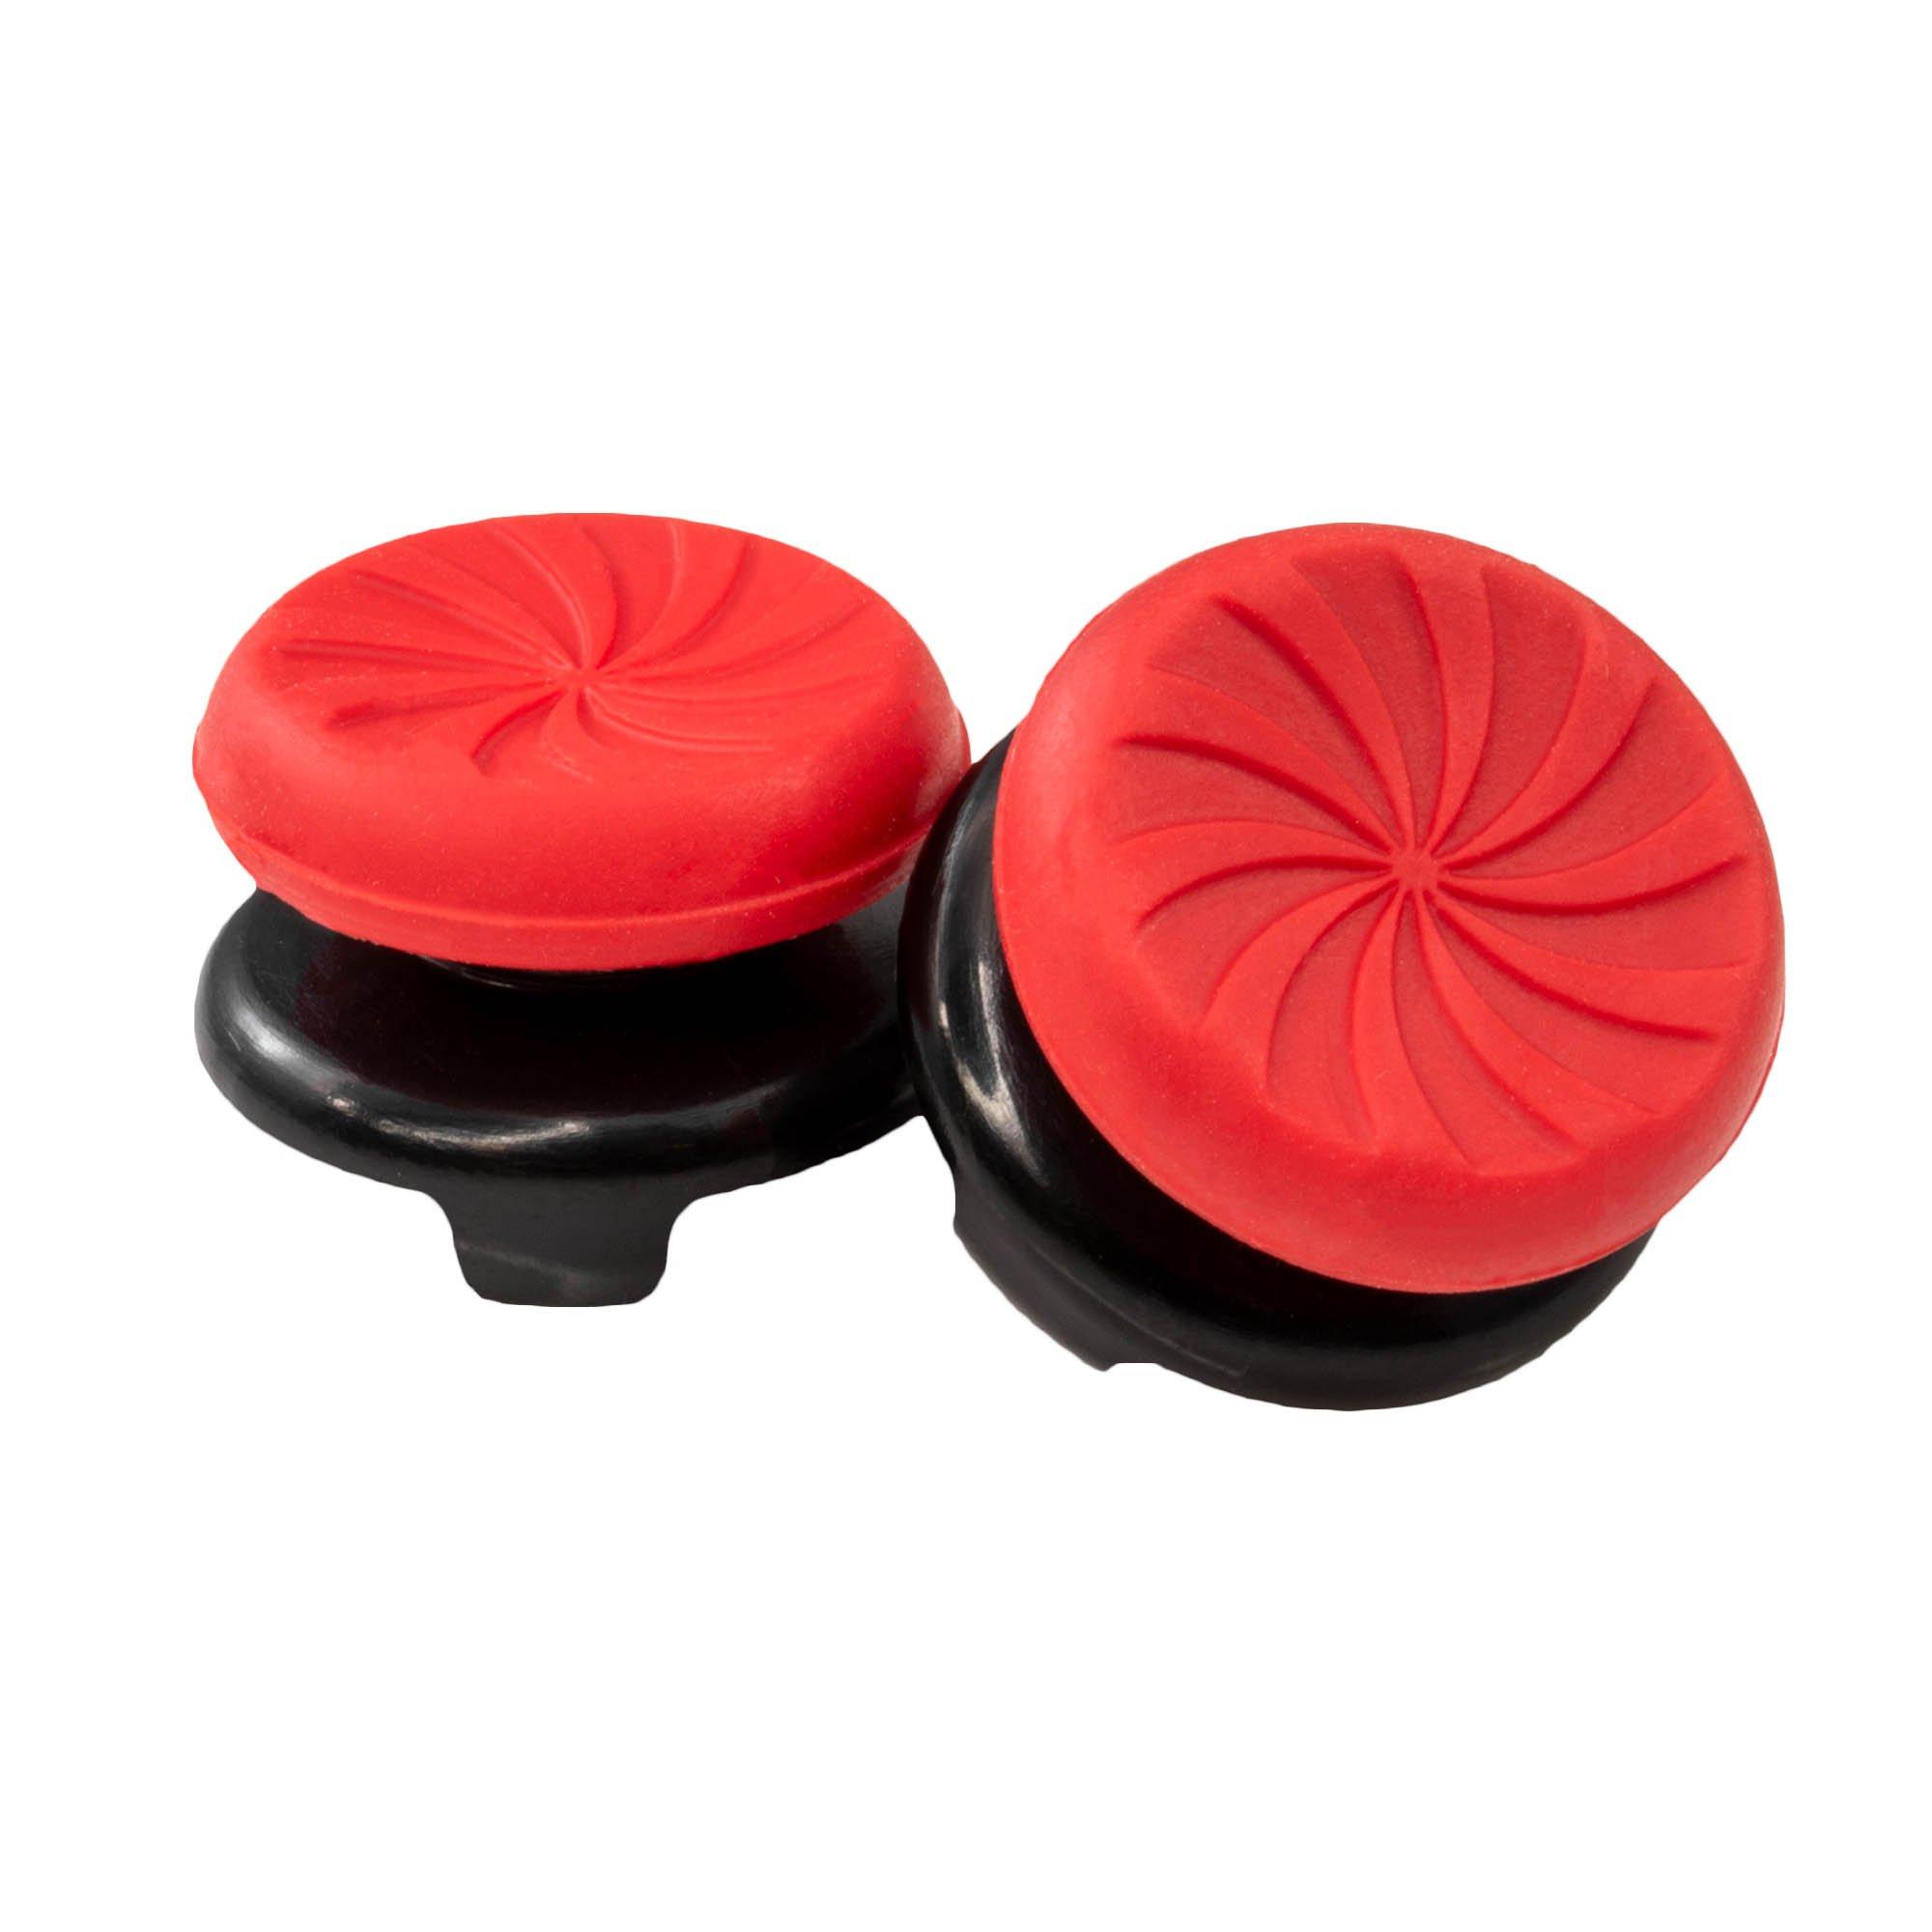 X FPS Xbox Thumbsticks Freek GameStop Series for | and Performance One Inferno Xbox KontrolFreek